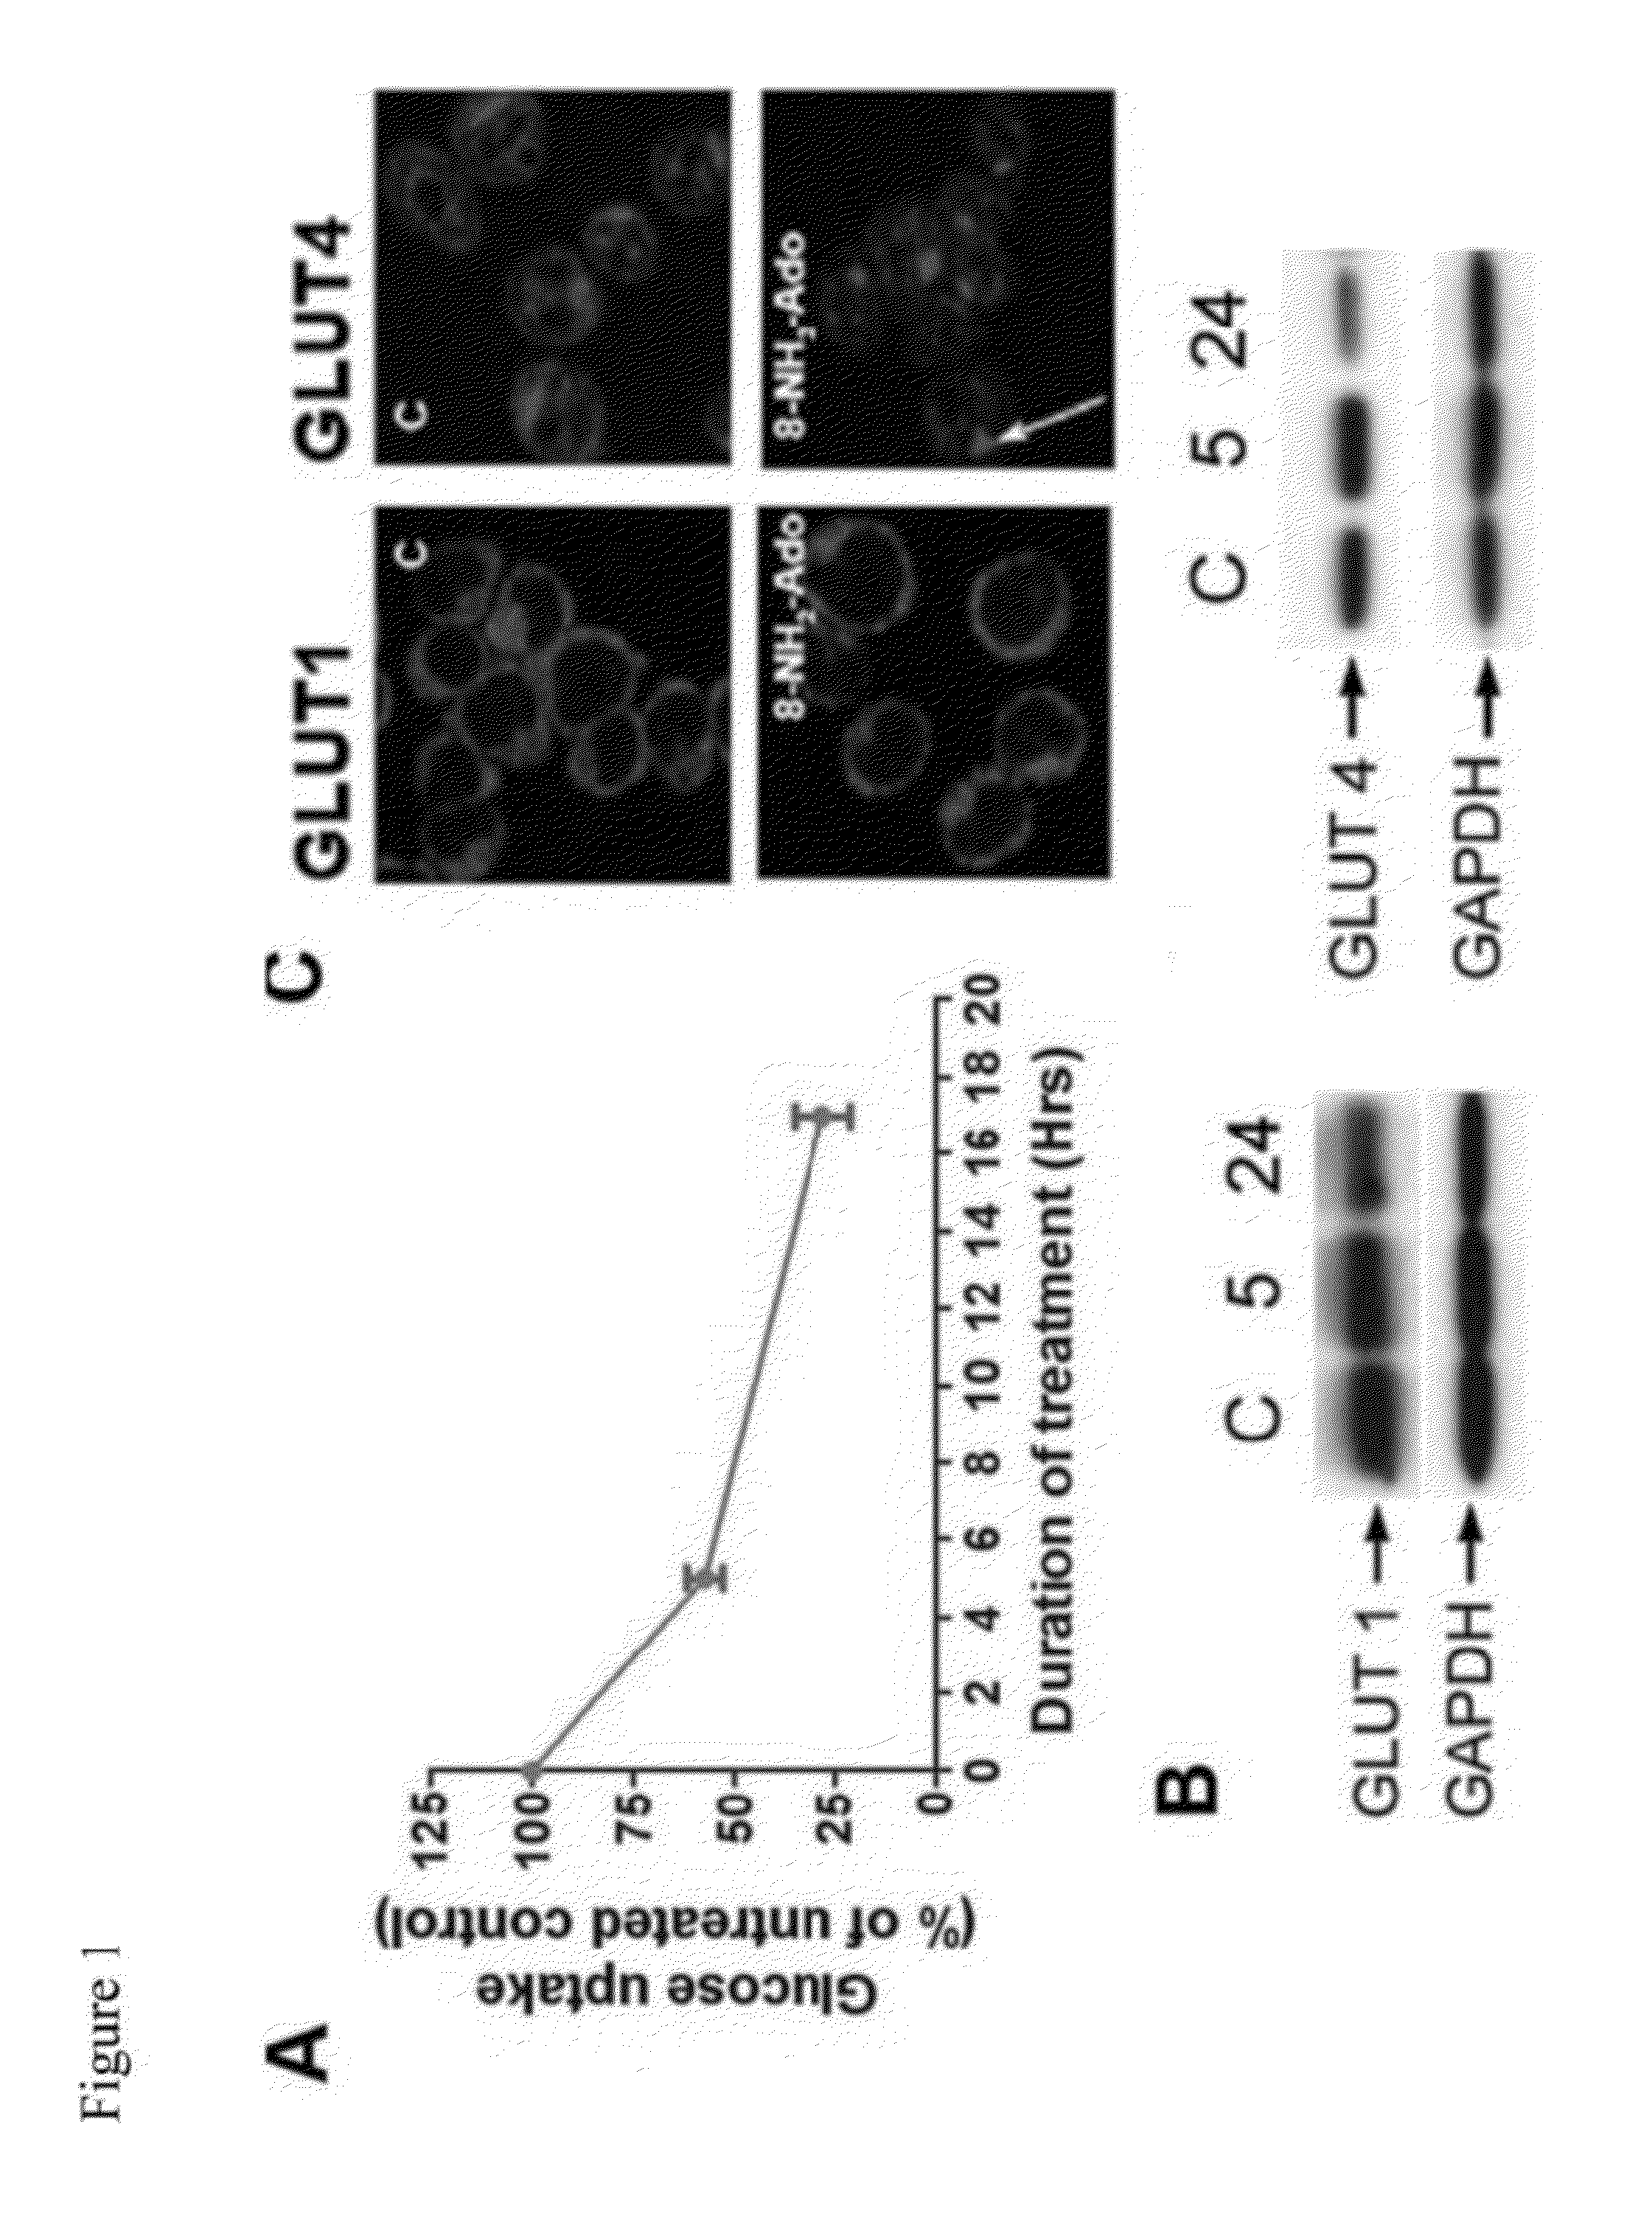 Methods of Treating Cancer with Glut Inhibitors